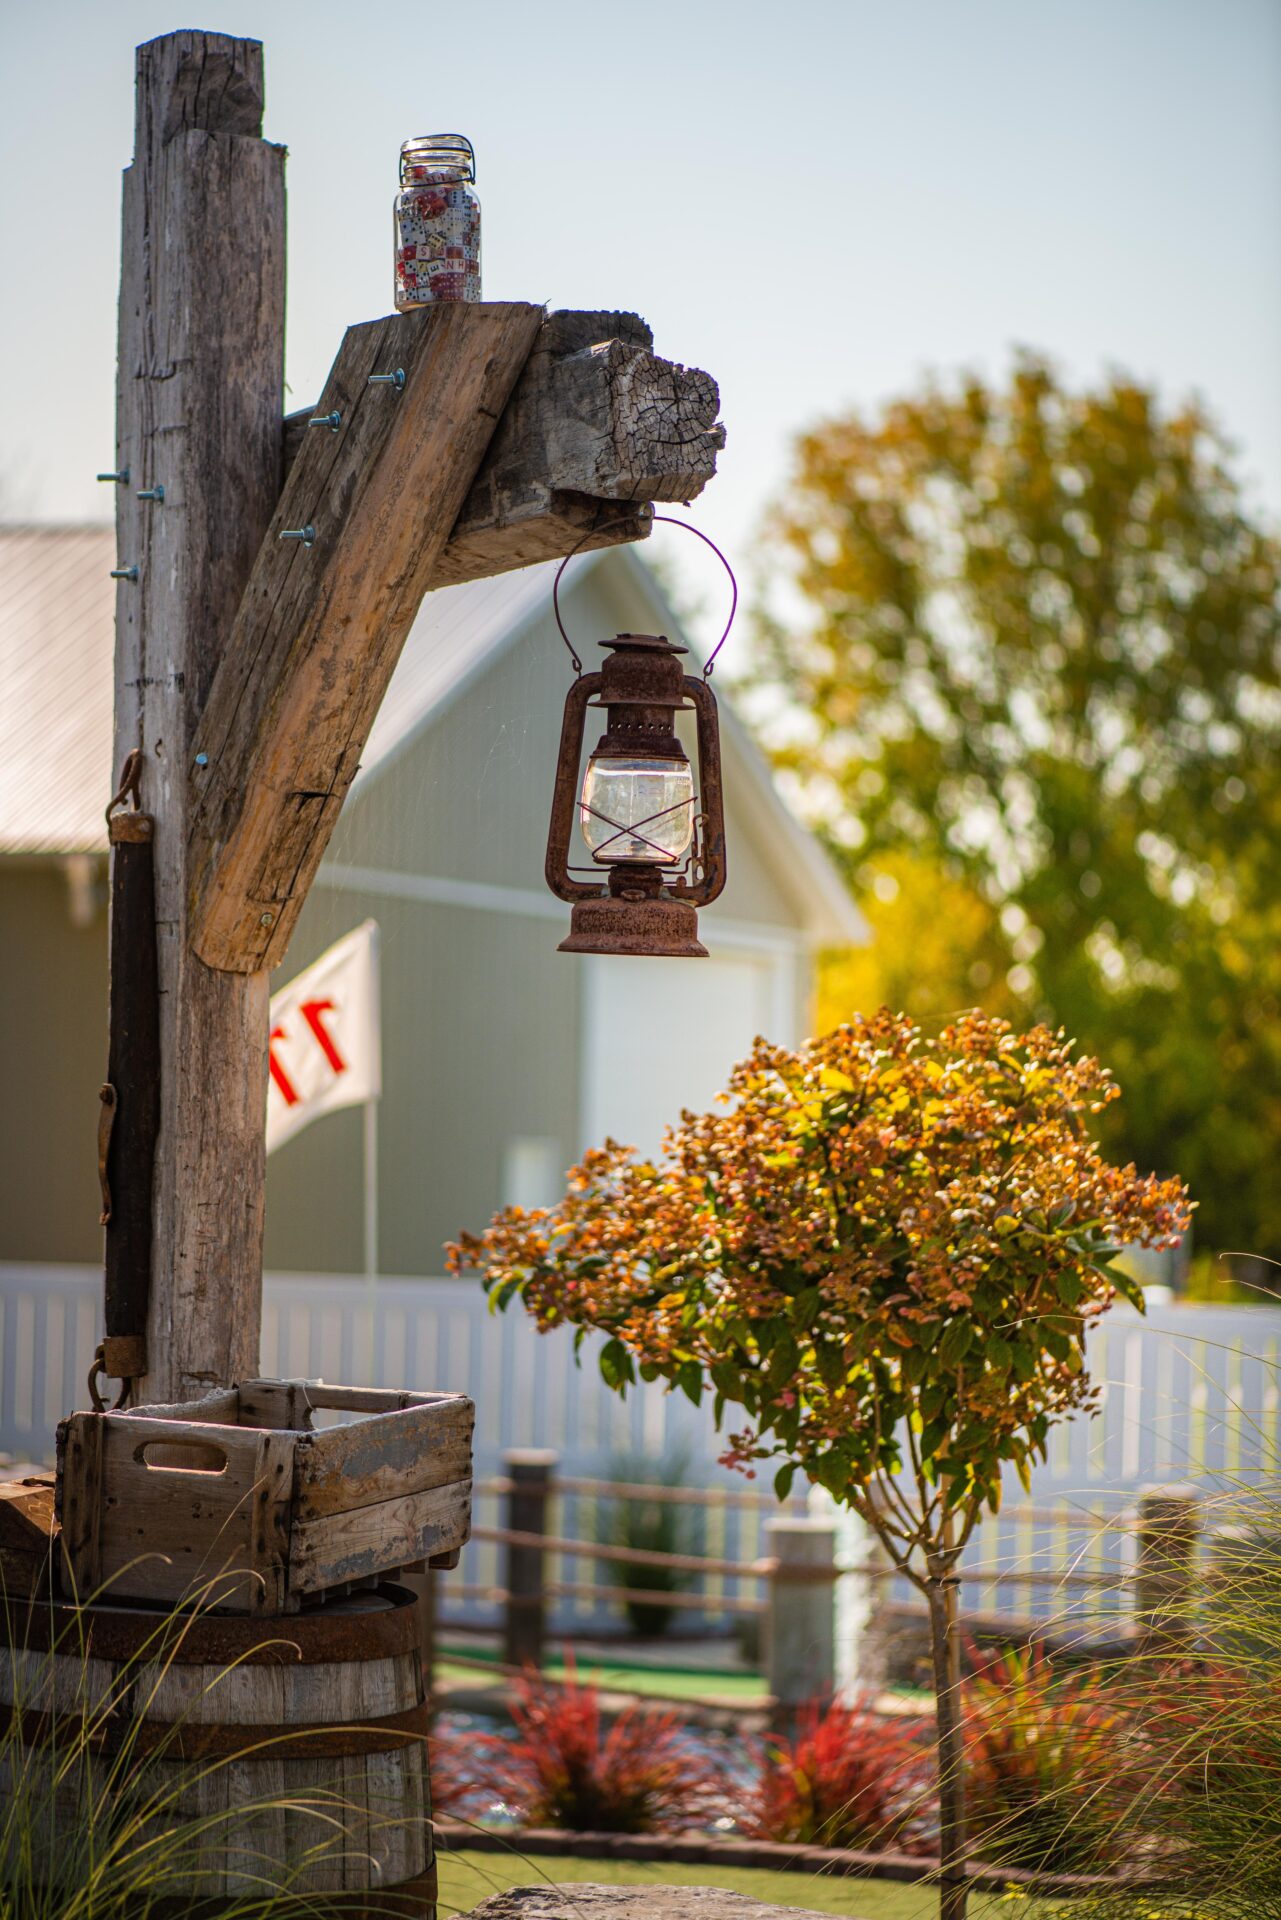 An old rustic lantern hangs from a weathered wooden post with jars on top, beside a flowering bush, with a white picket fence background.